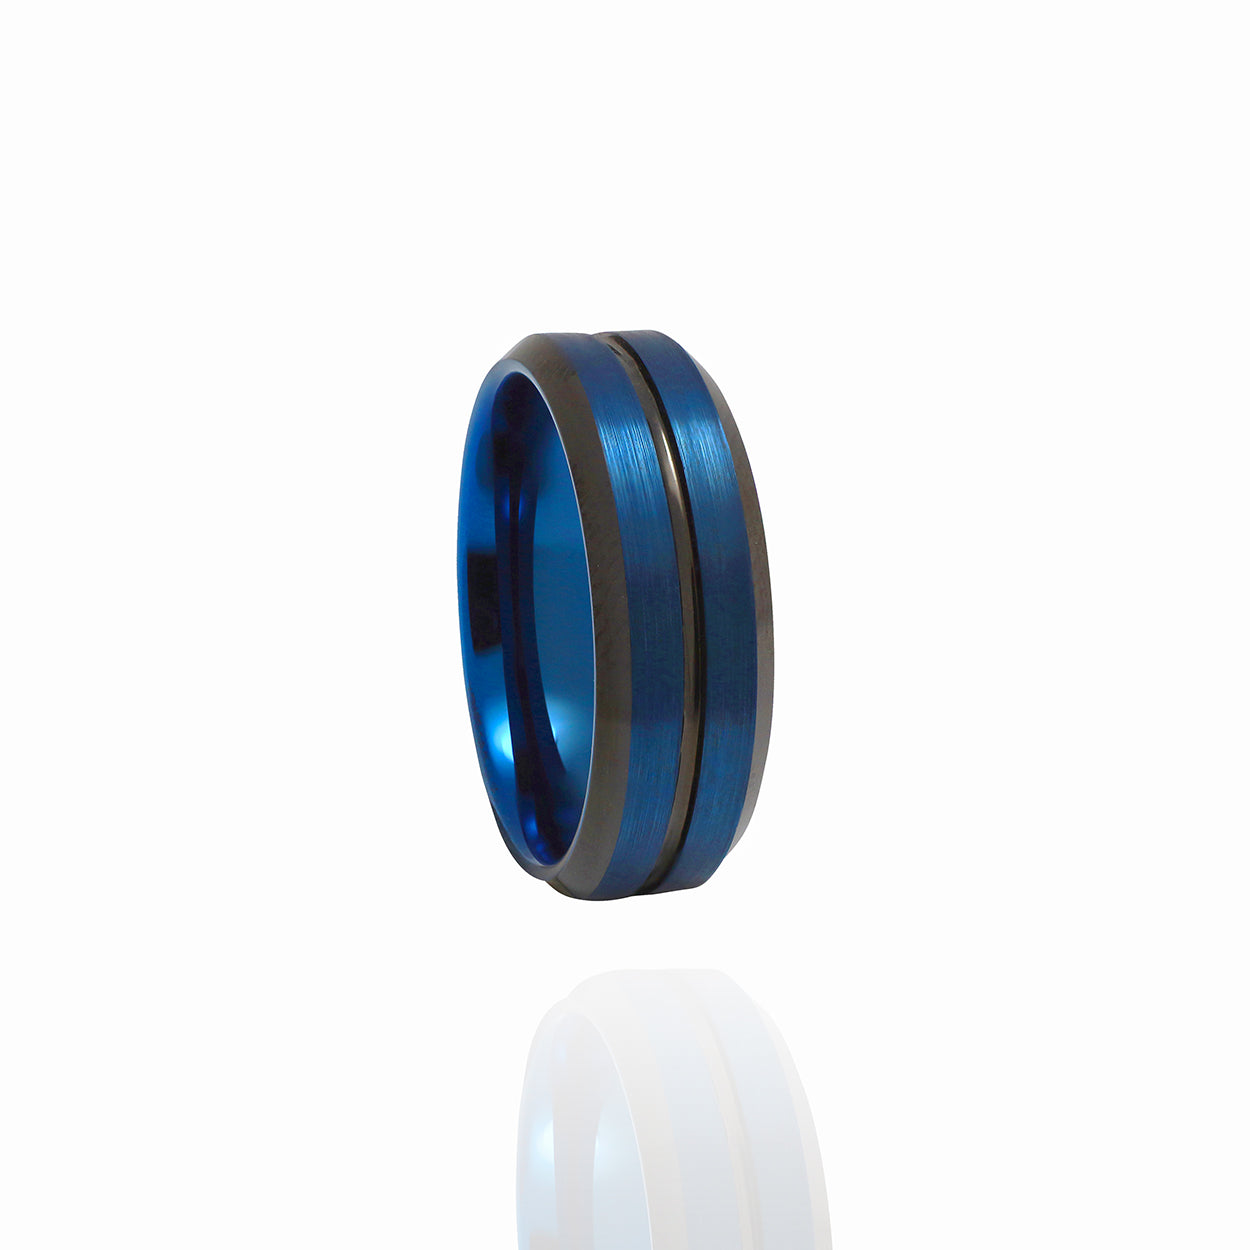 Black and Blue Plated Beveled Edge Sating Finished Tungsten Carbide Ring